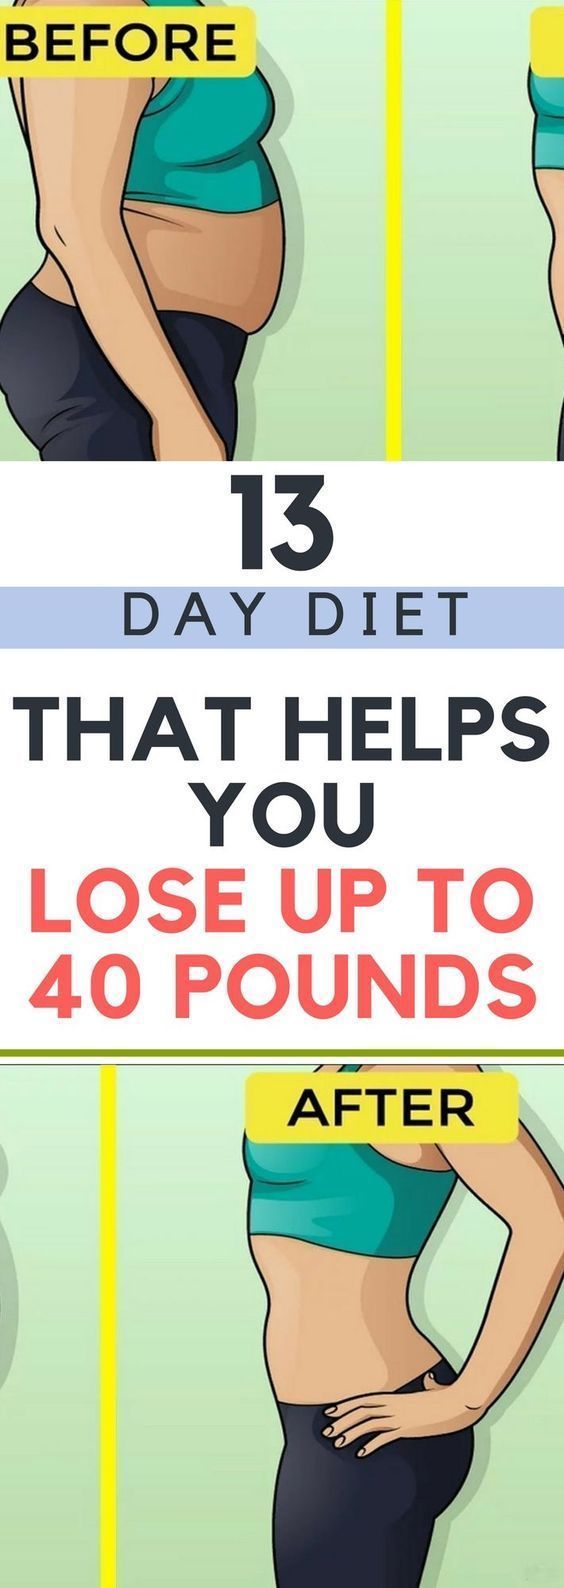 There is a diet which lasts 13 days. It is hard but effective. You can have a normal menu for 13 days and you will not gain weight for 2 years after the diet. It is the Danish Diet or The Copenhagen diet. -   17 fitness diet lost
 ideas